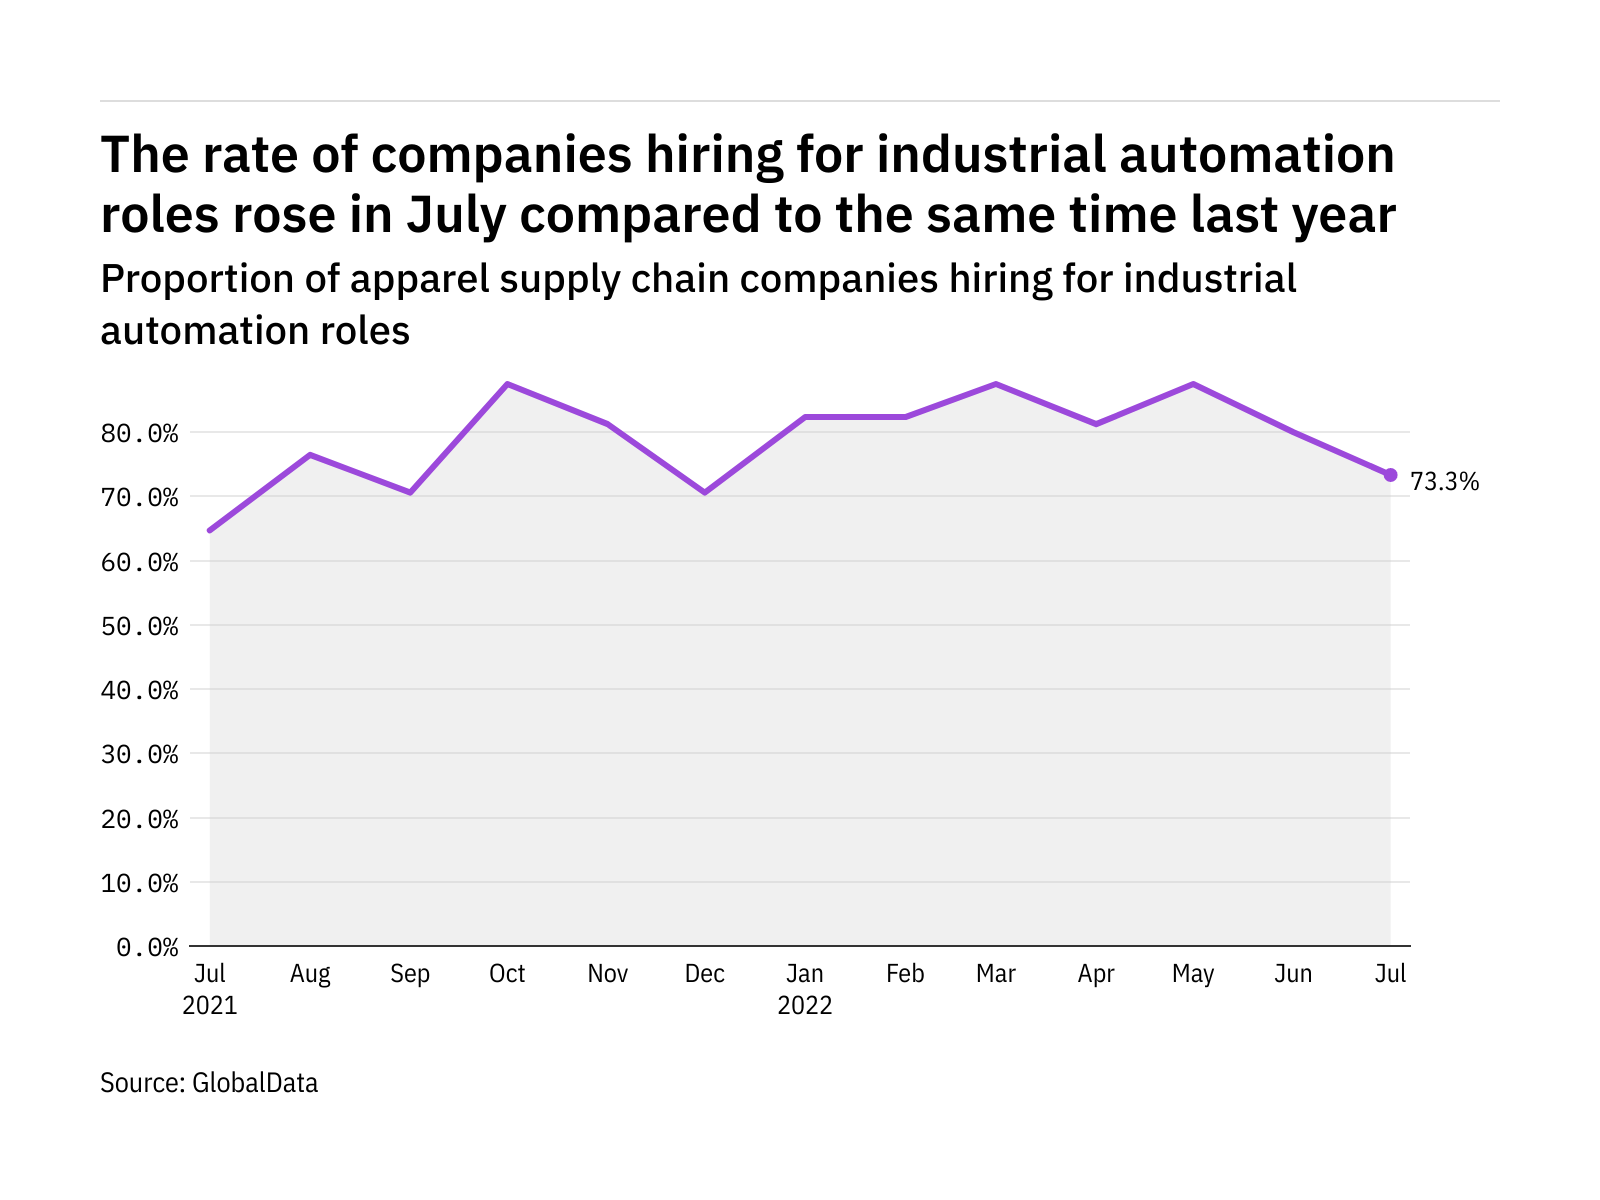 Industrial automation hiring in apparel rose in July